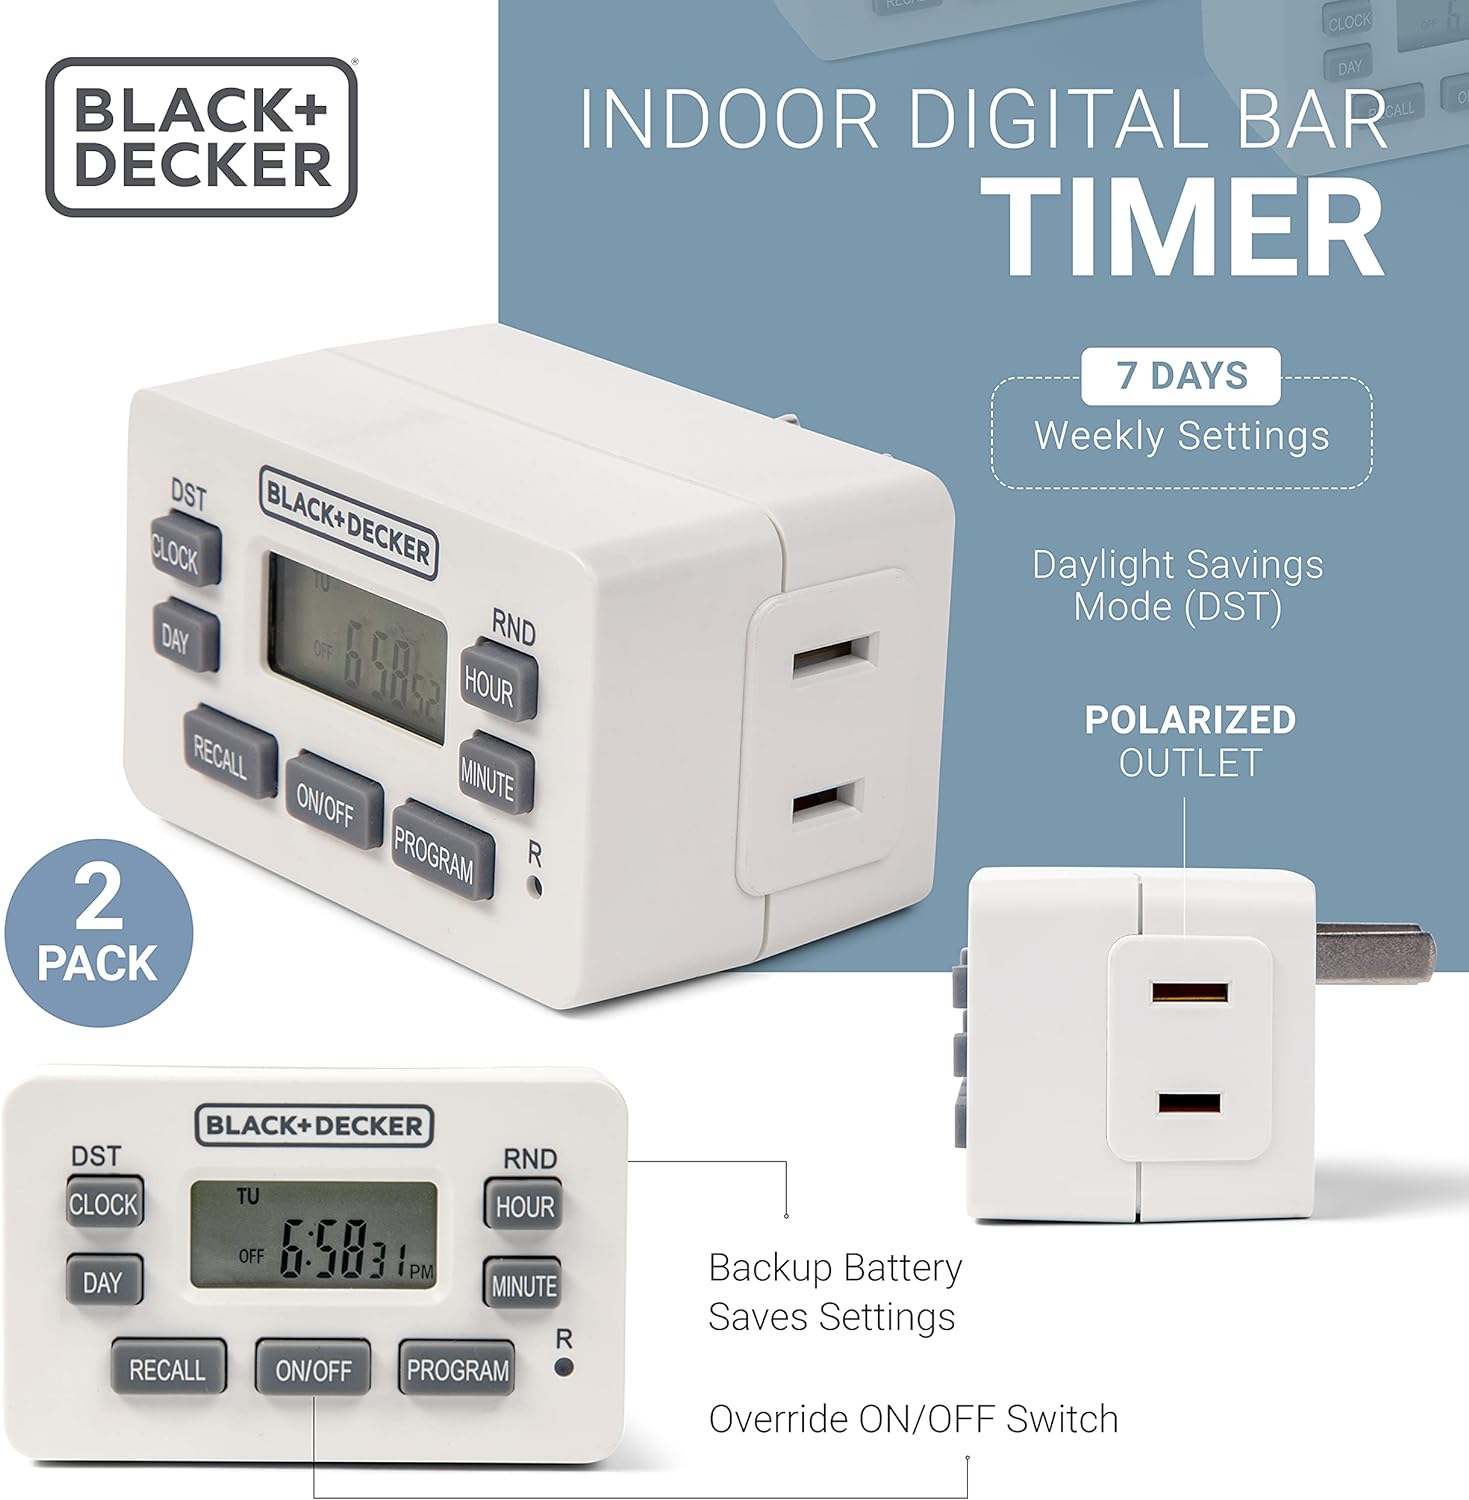 BLACK+DECKER Light Timers, Programmable, Indoor, 2 Pack, with Polarized Outlet - Compact Digital Timer Outlet with Daylight Savings Mode, 7-